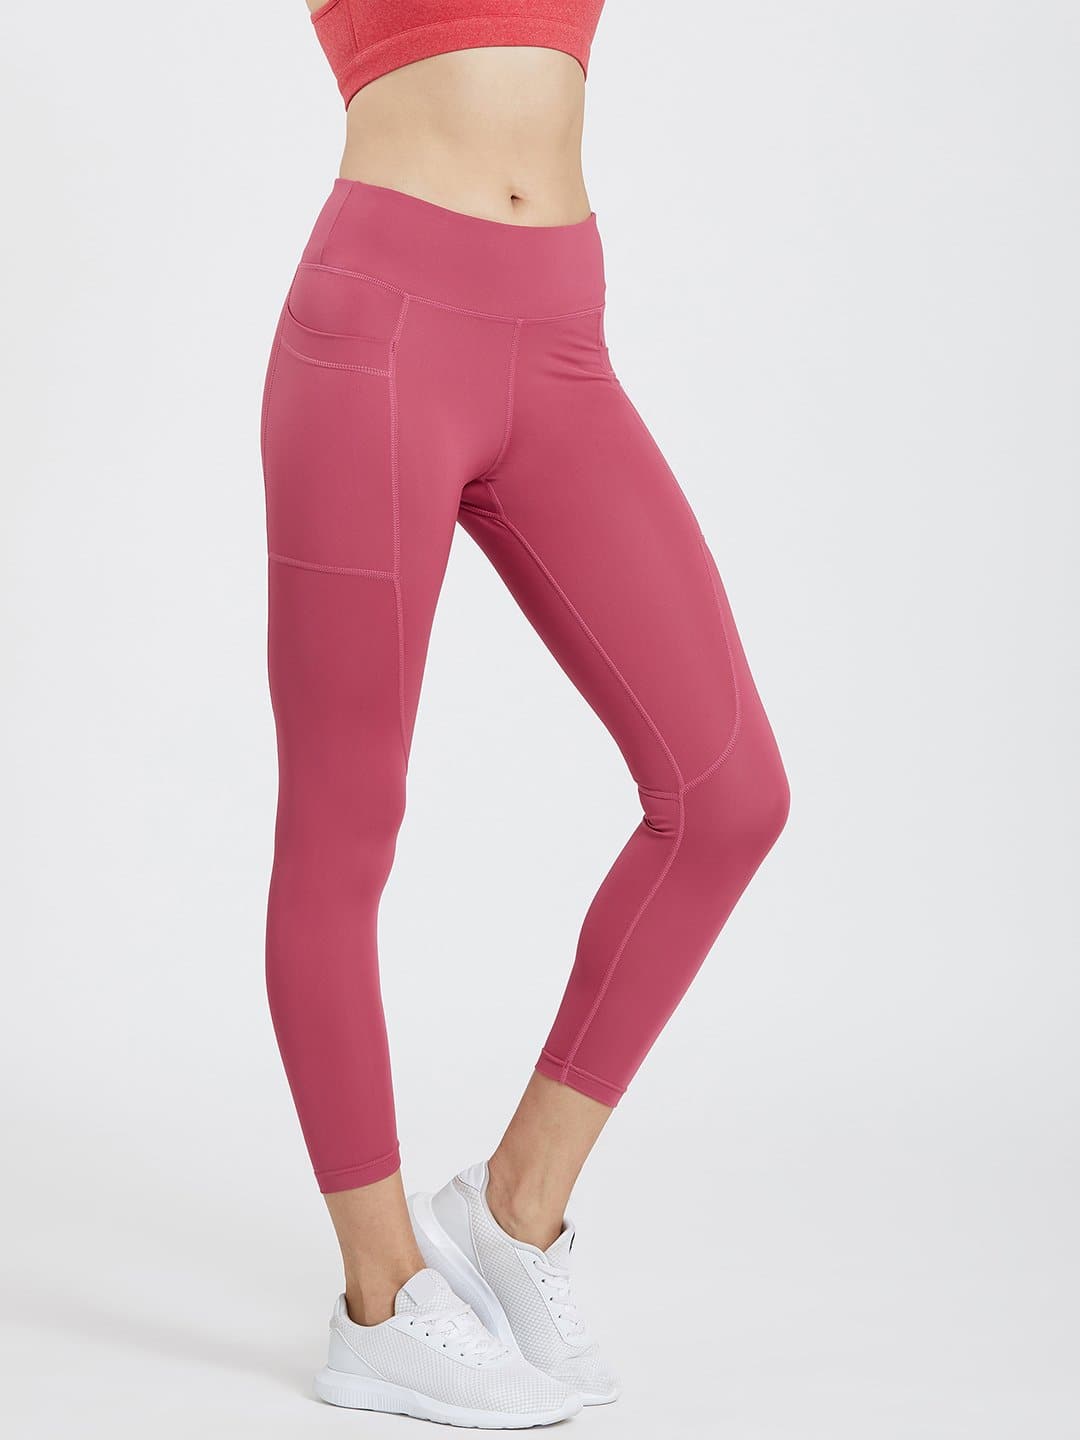 Maxtreme Power me Hippie Pink Ankle Pockets Leggings